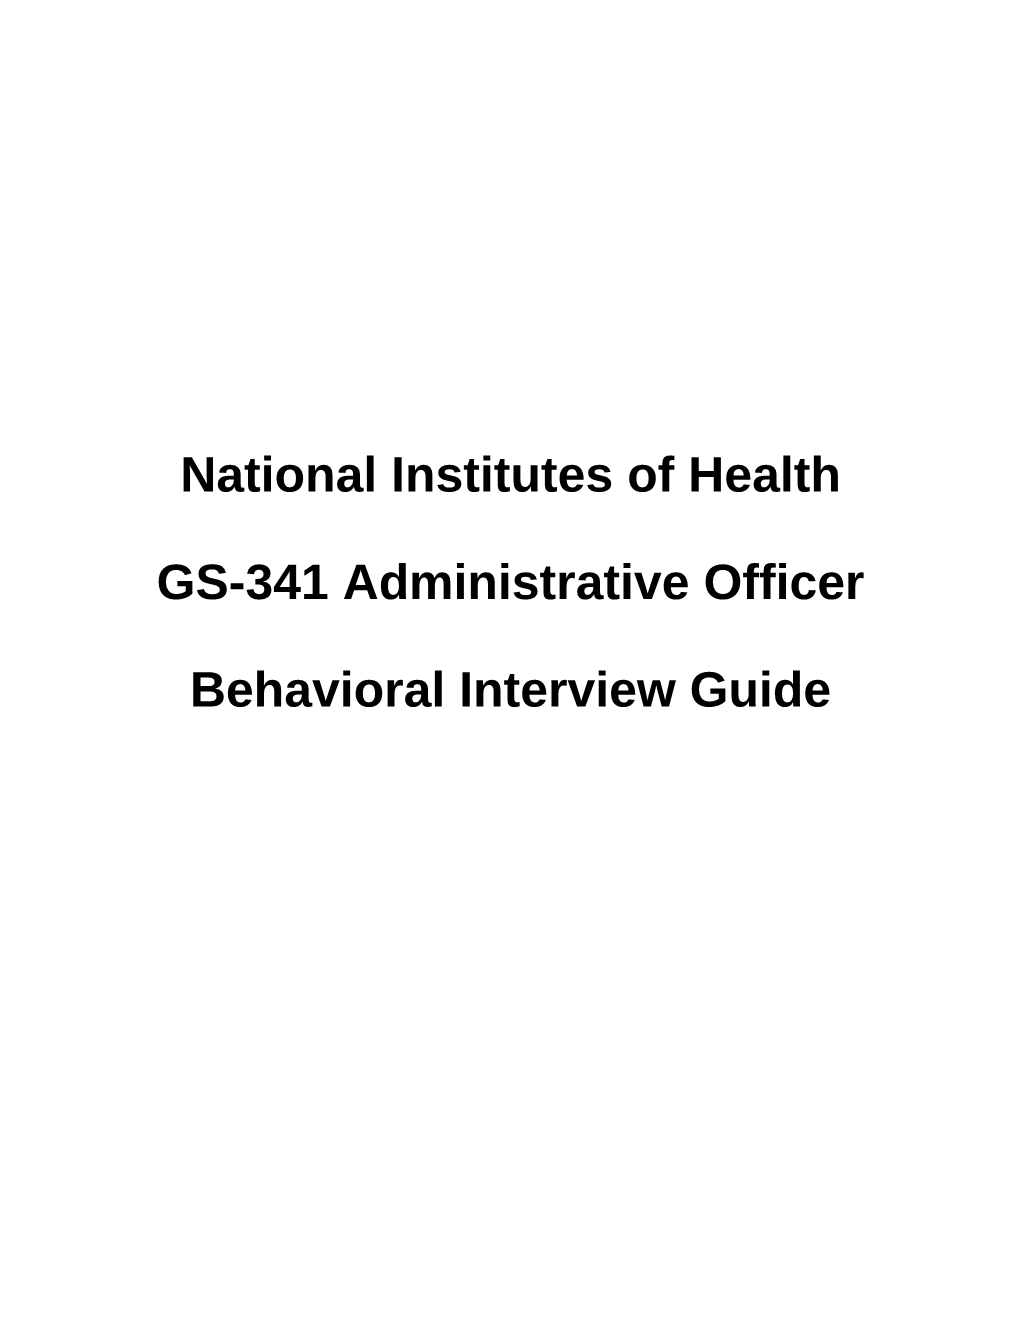 NIH Behavioral Interview Guide GS-341 Administrative Officer